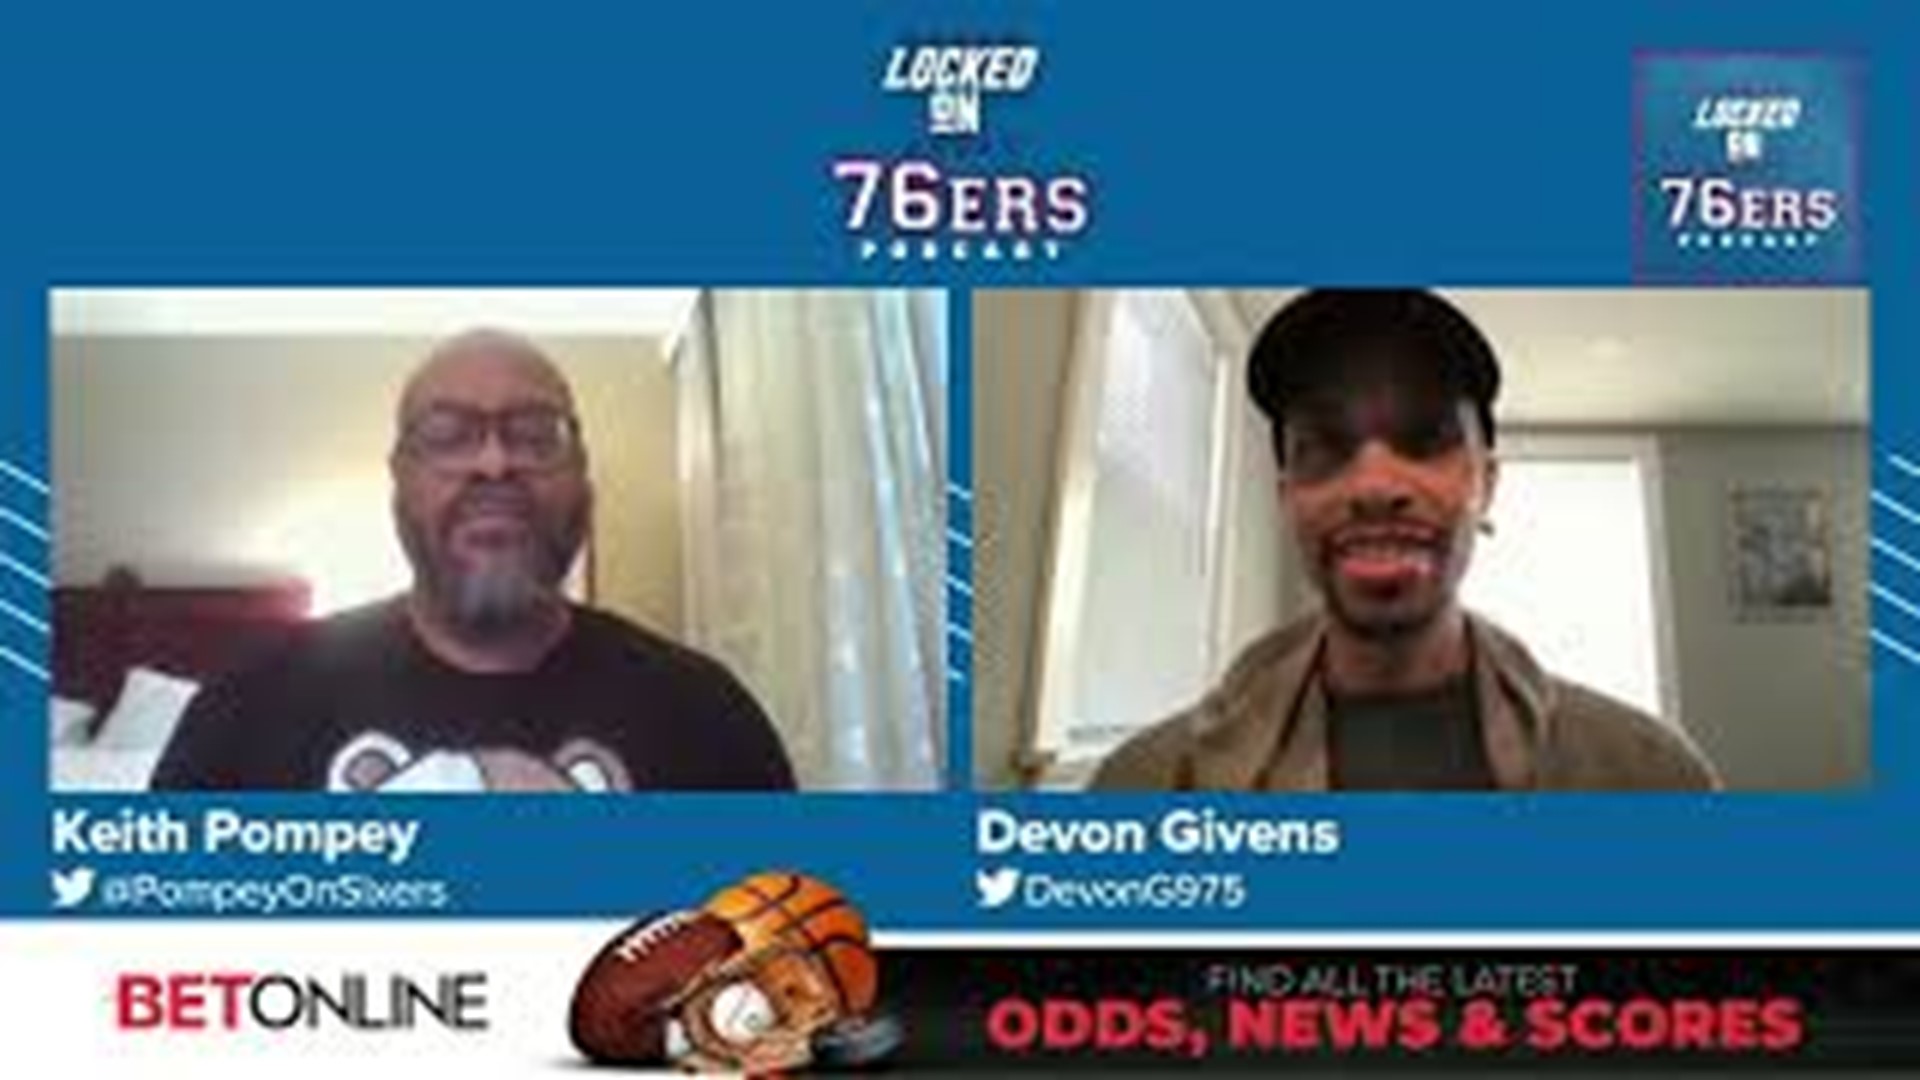 Devon Givens and Keith Pompey discuss if people should buy into the 76ers this season.